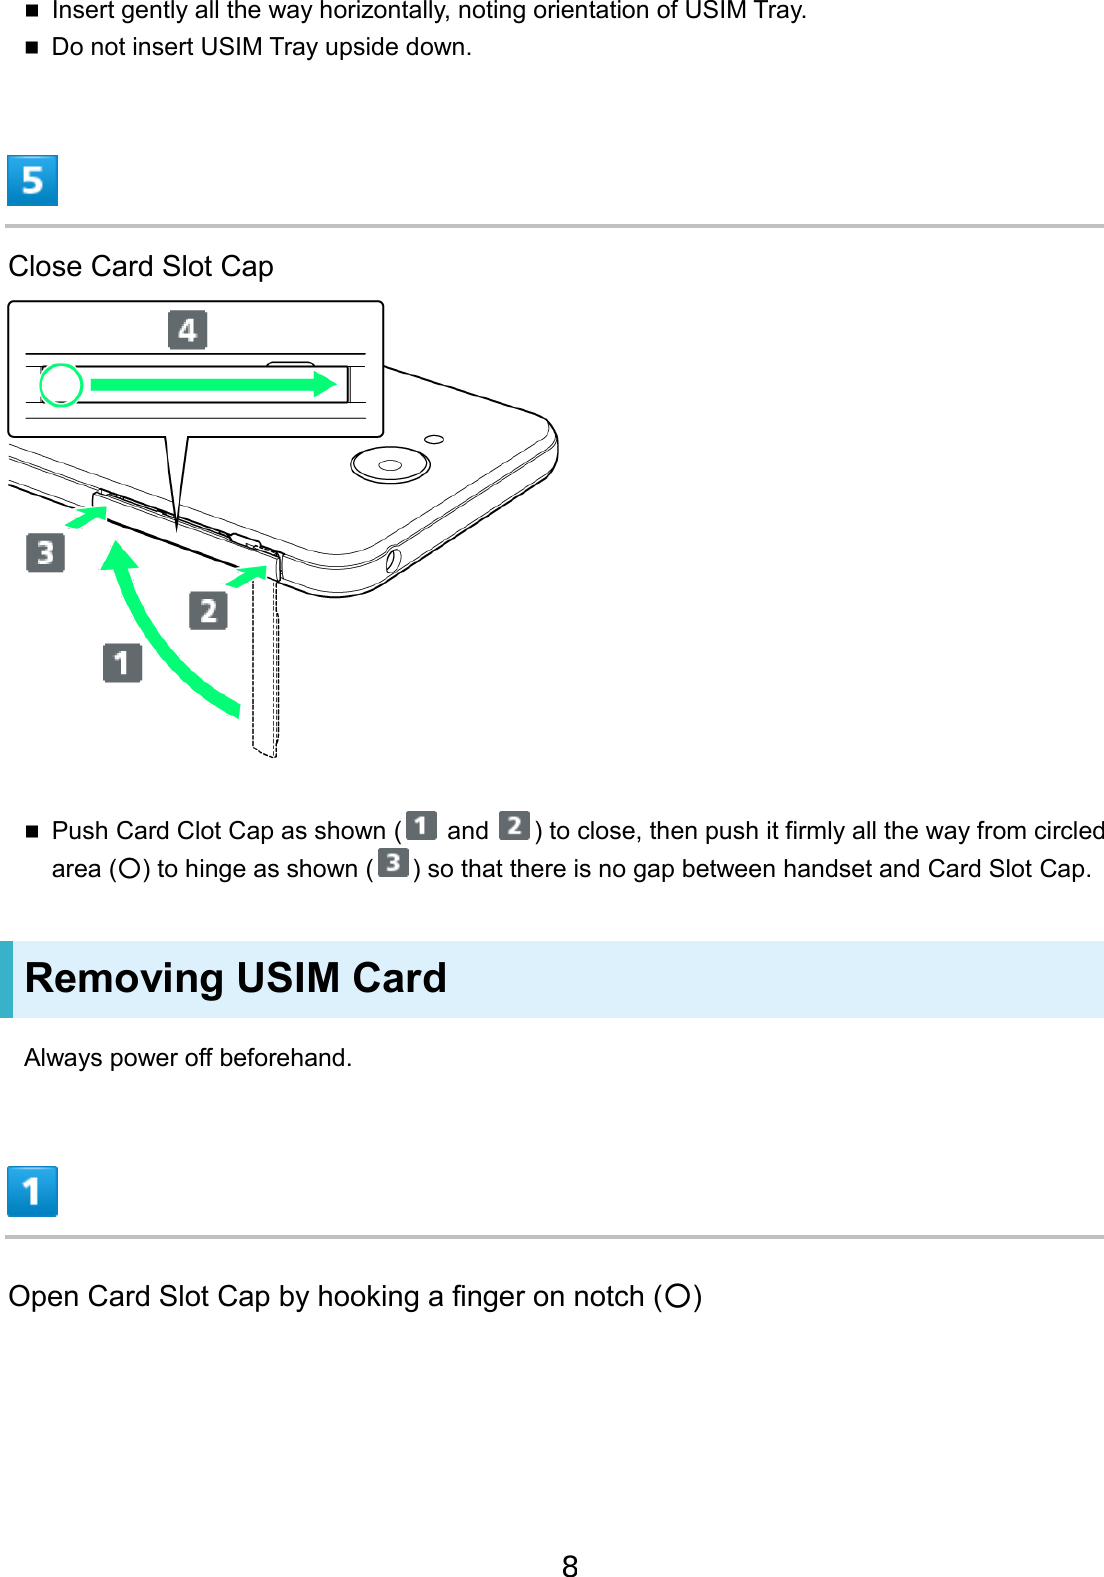 Insert gently all the way horizontally, noting orientation of USIM Tray.Do not insert USIM Tray upside down.Close Card Slot Cap Push Card Clot Cap as shown (  and  ) to close, then push it firmly all the way from circled area (○) to hinge as shown ( ) so that there is no gap between handset and Card Slot Cap. Removing USIM Card Always power off beforehand. Open Card Slot Cap by hooking a finger on notch (○) 8